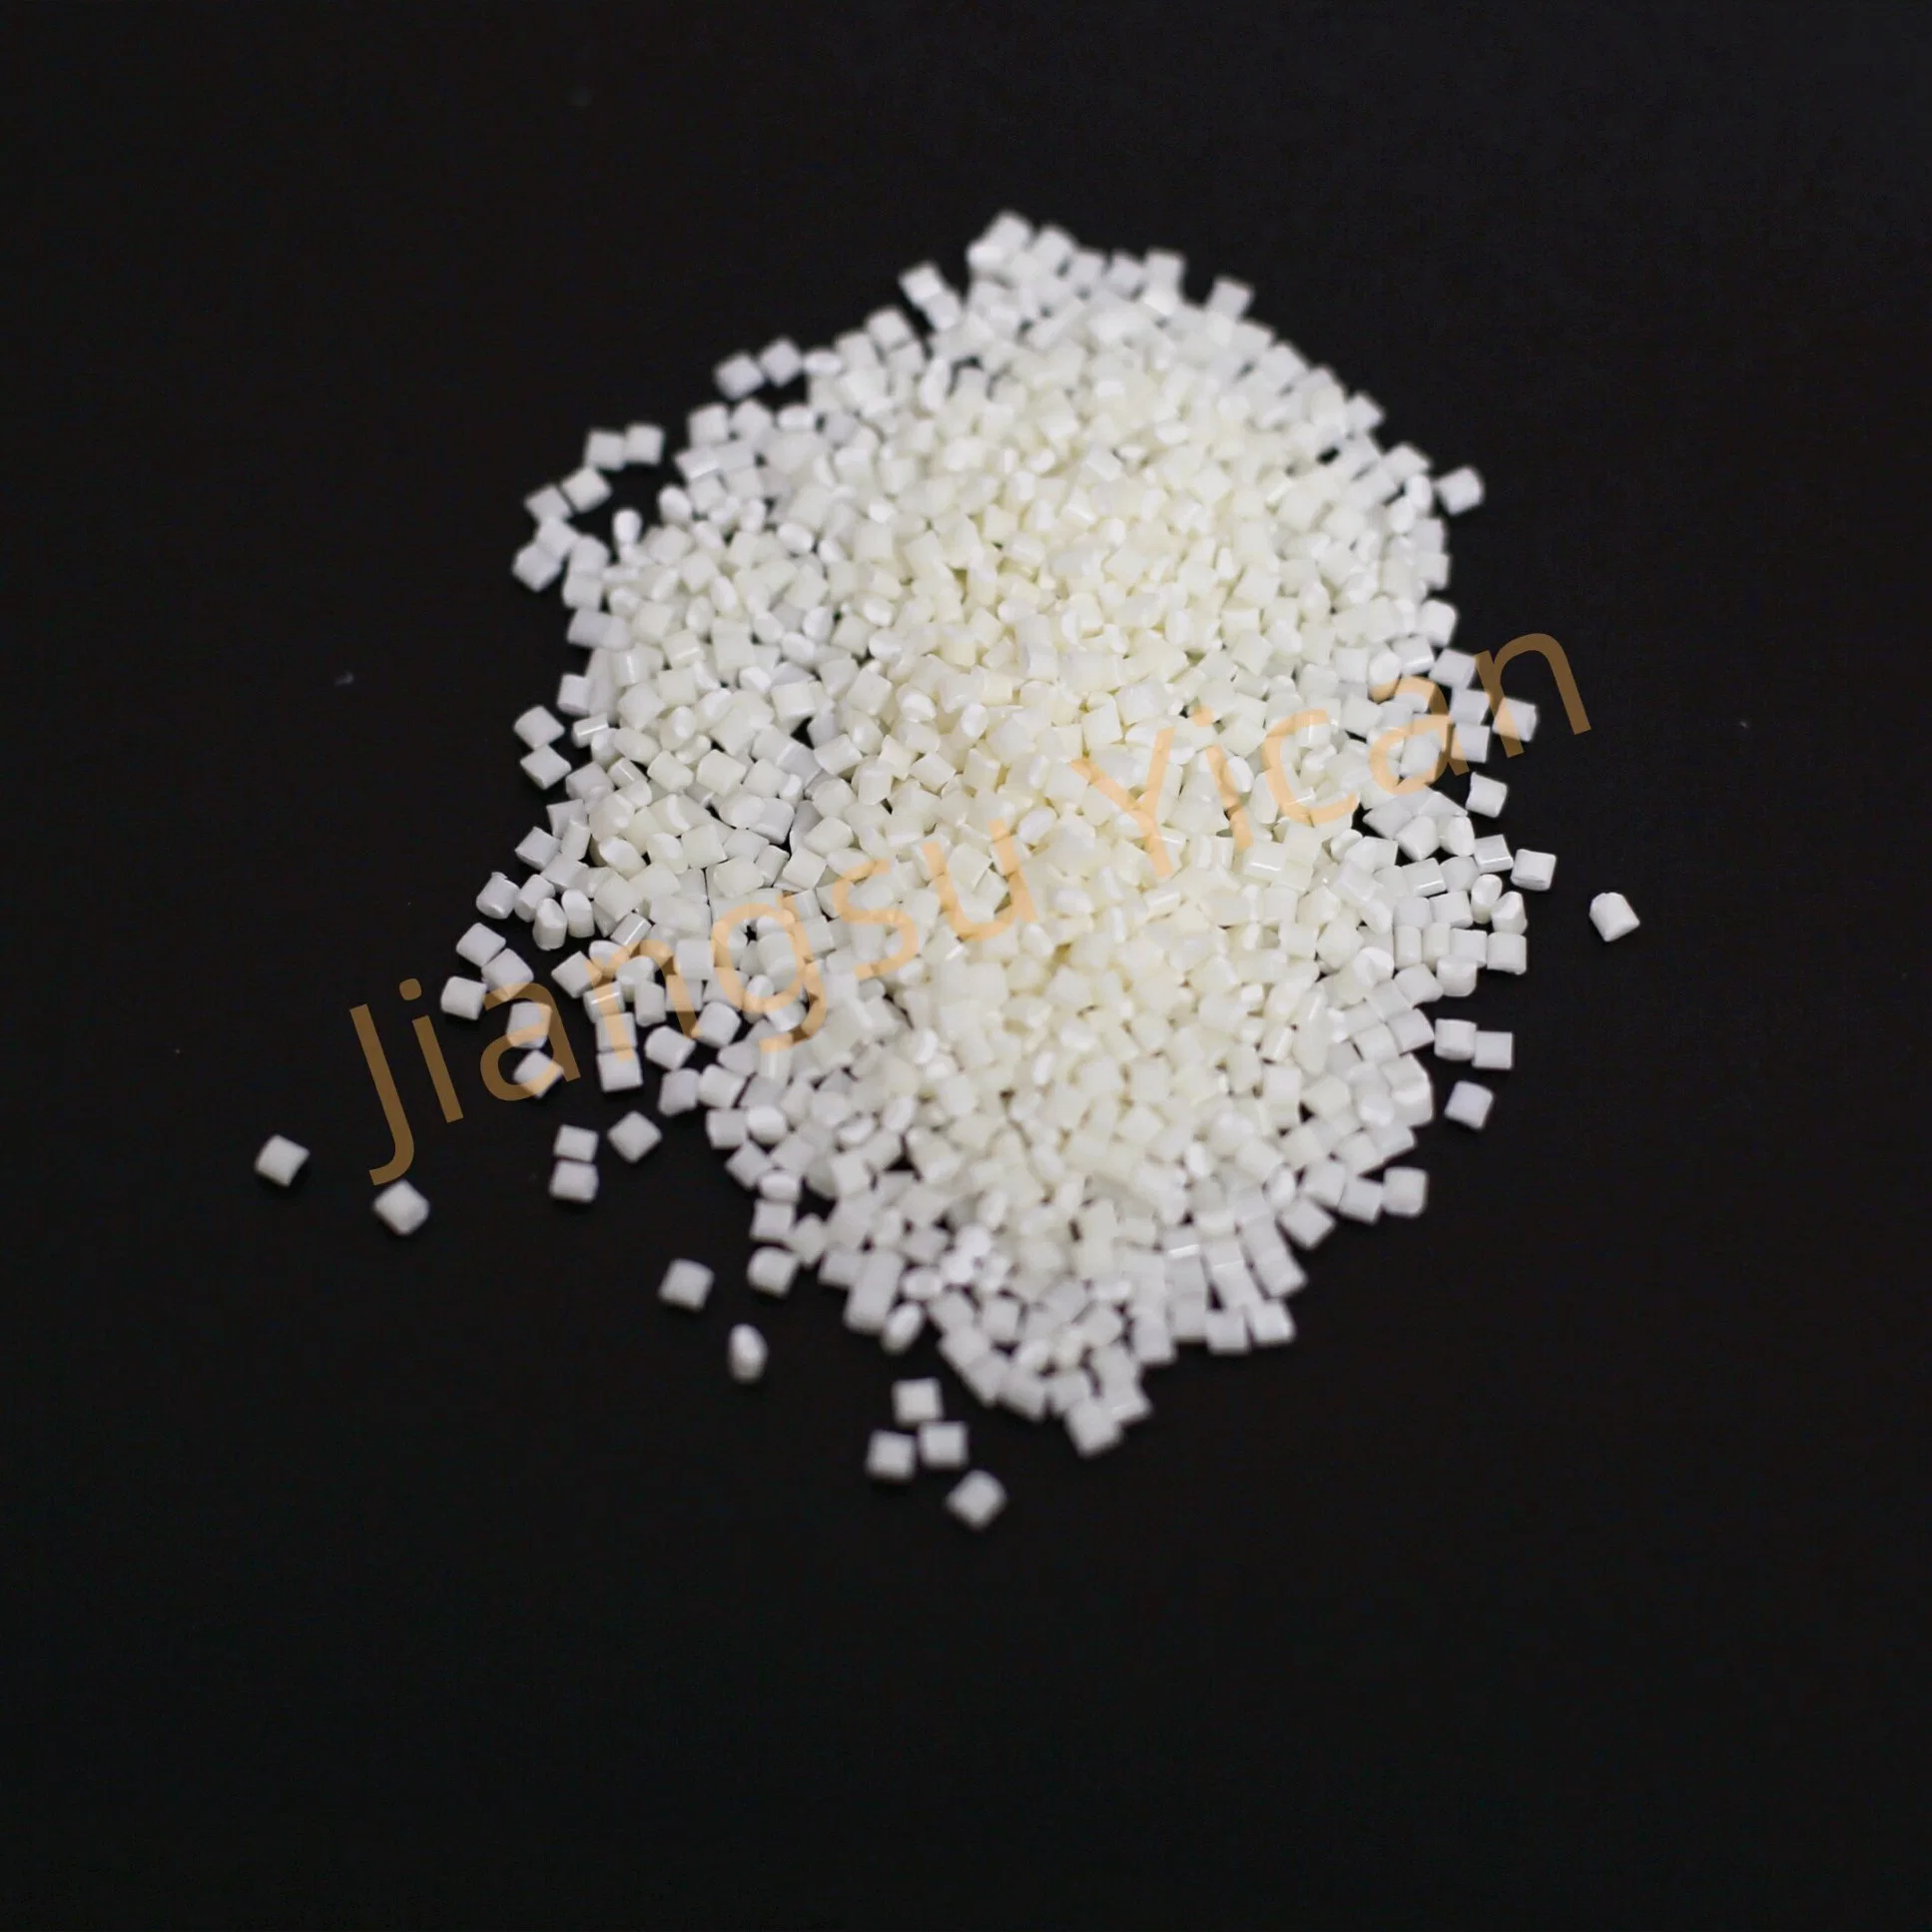 ABS Resin Granulated Virgin Price ABS Homopolymer Polymer Granule Price Price Plastic Raw Material Manufacture